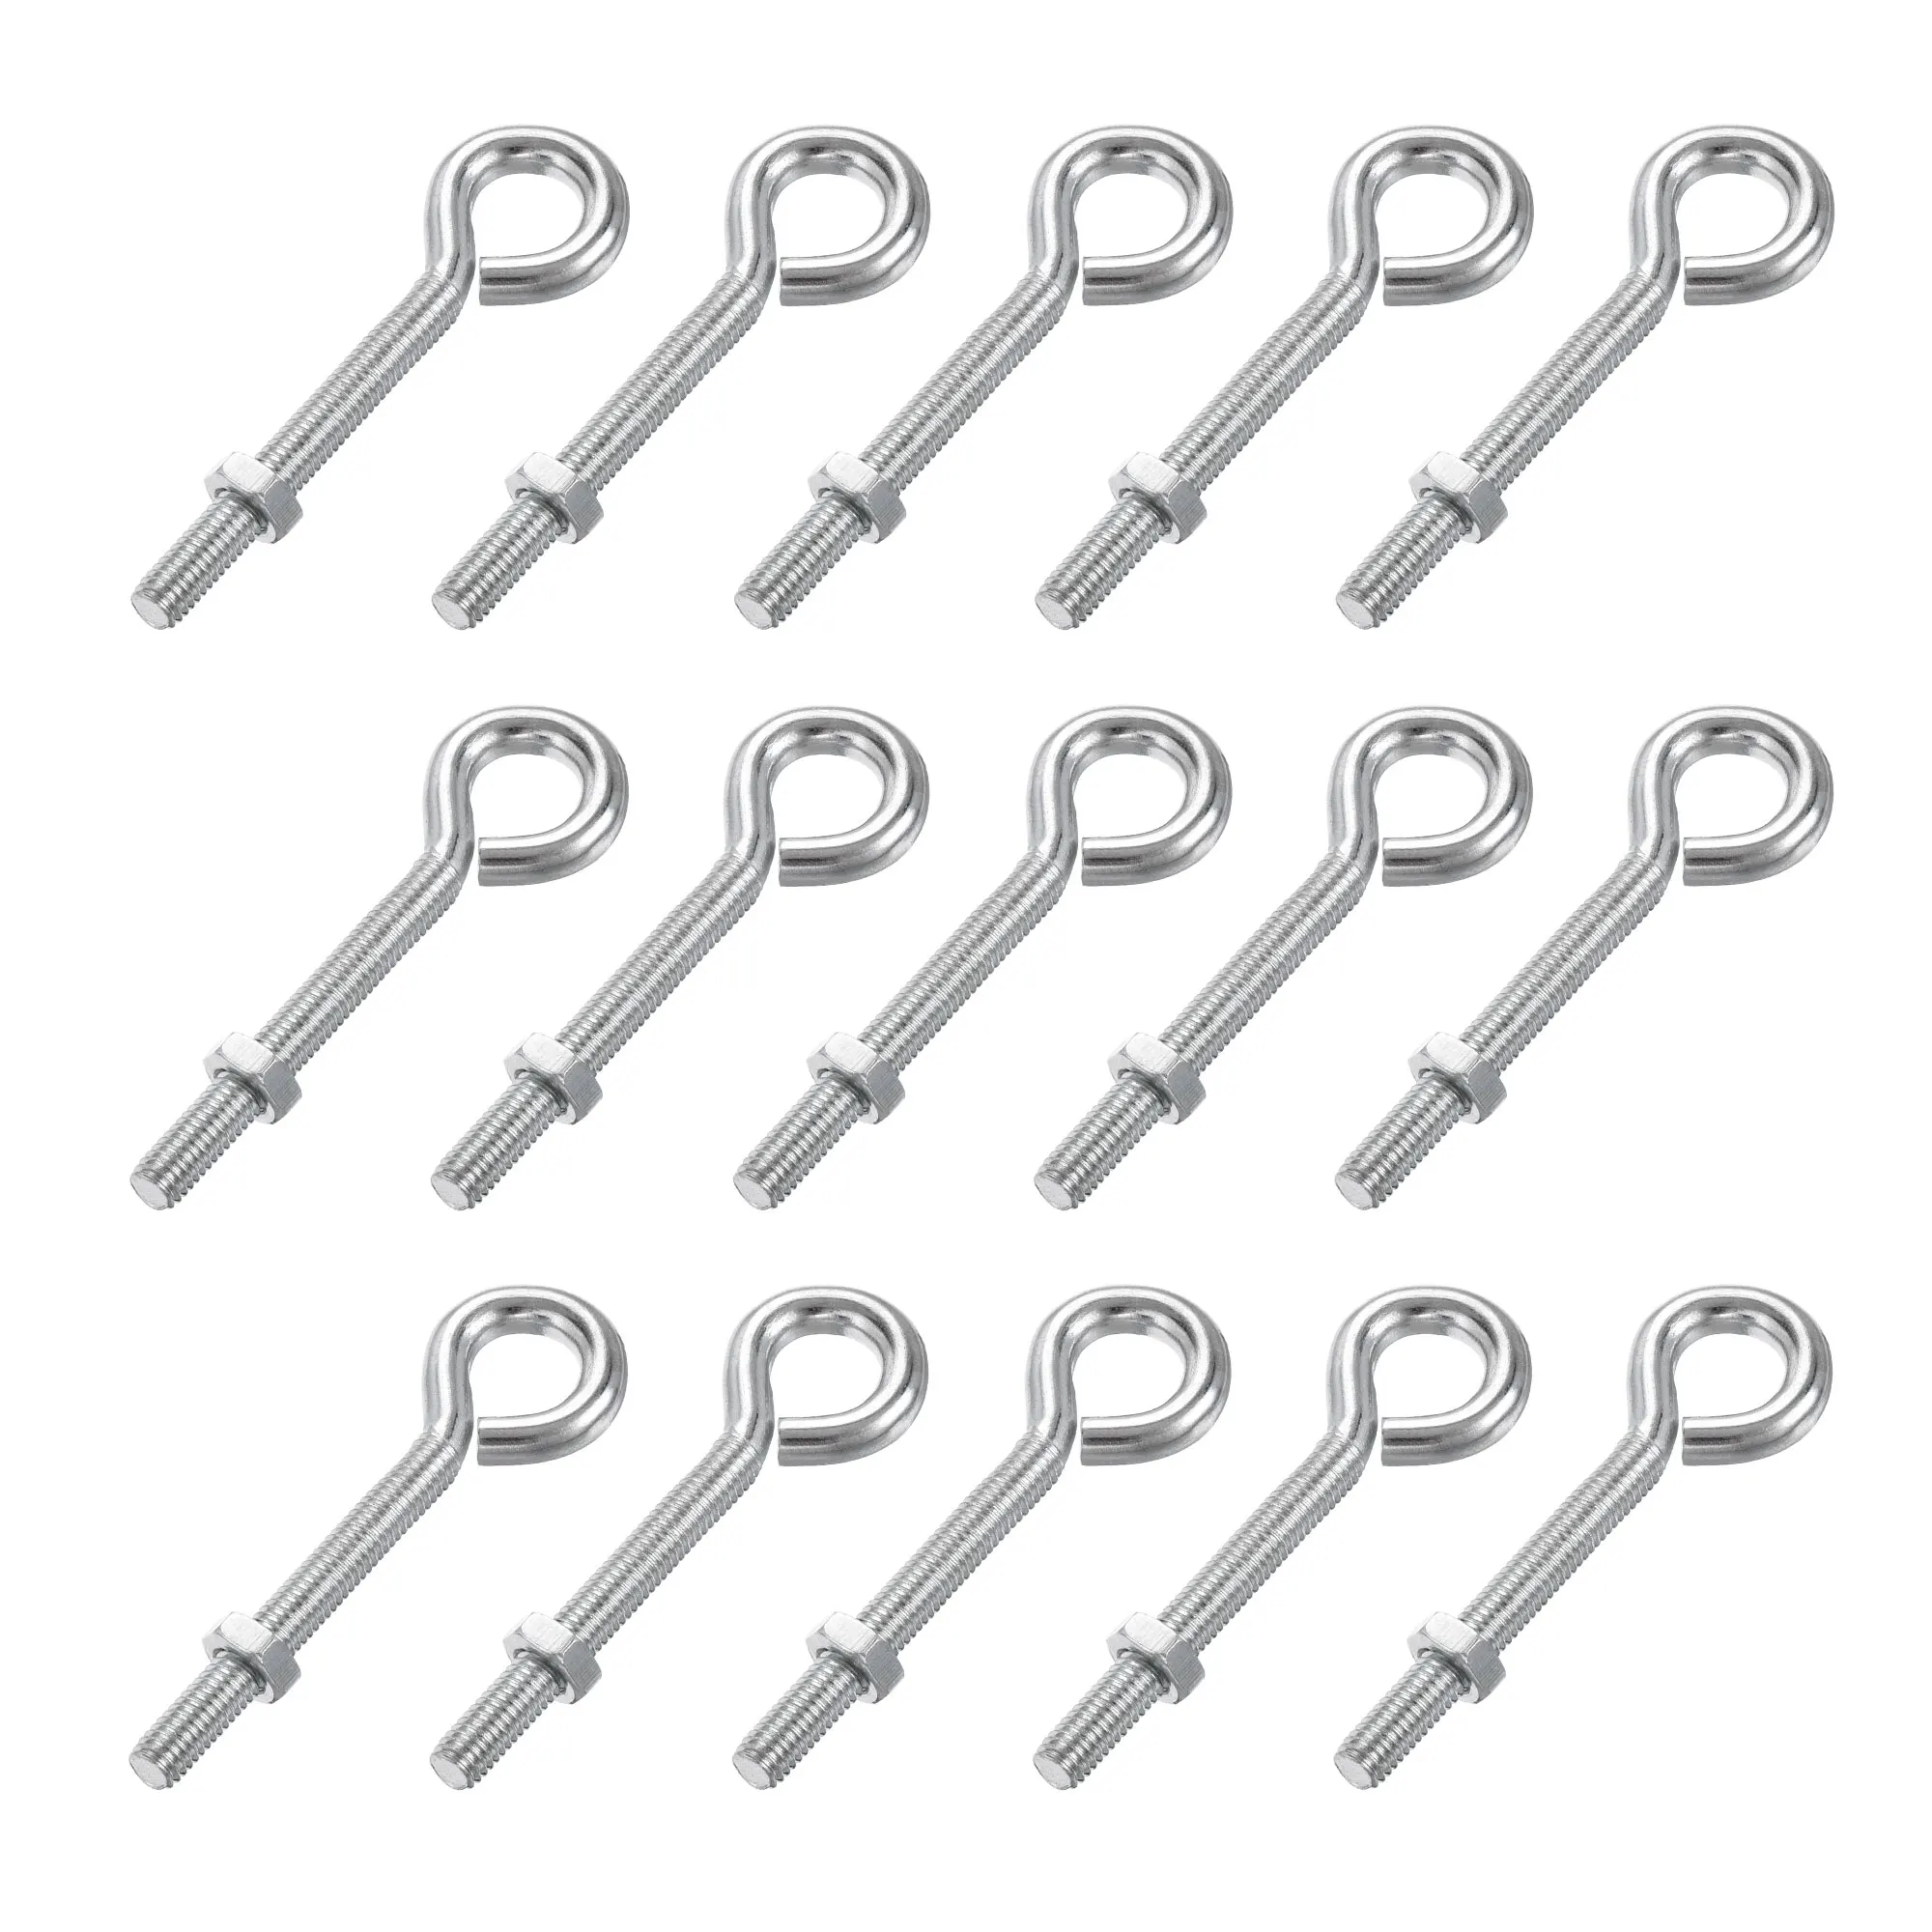 

Uxcell M5x40mm Eye Hooks Screws Bolts Kit, 15pcs Carbon Steel Hanger Eyelet Hooks Screw with Hex Nuts for Metal Hook, Wood